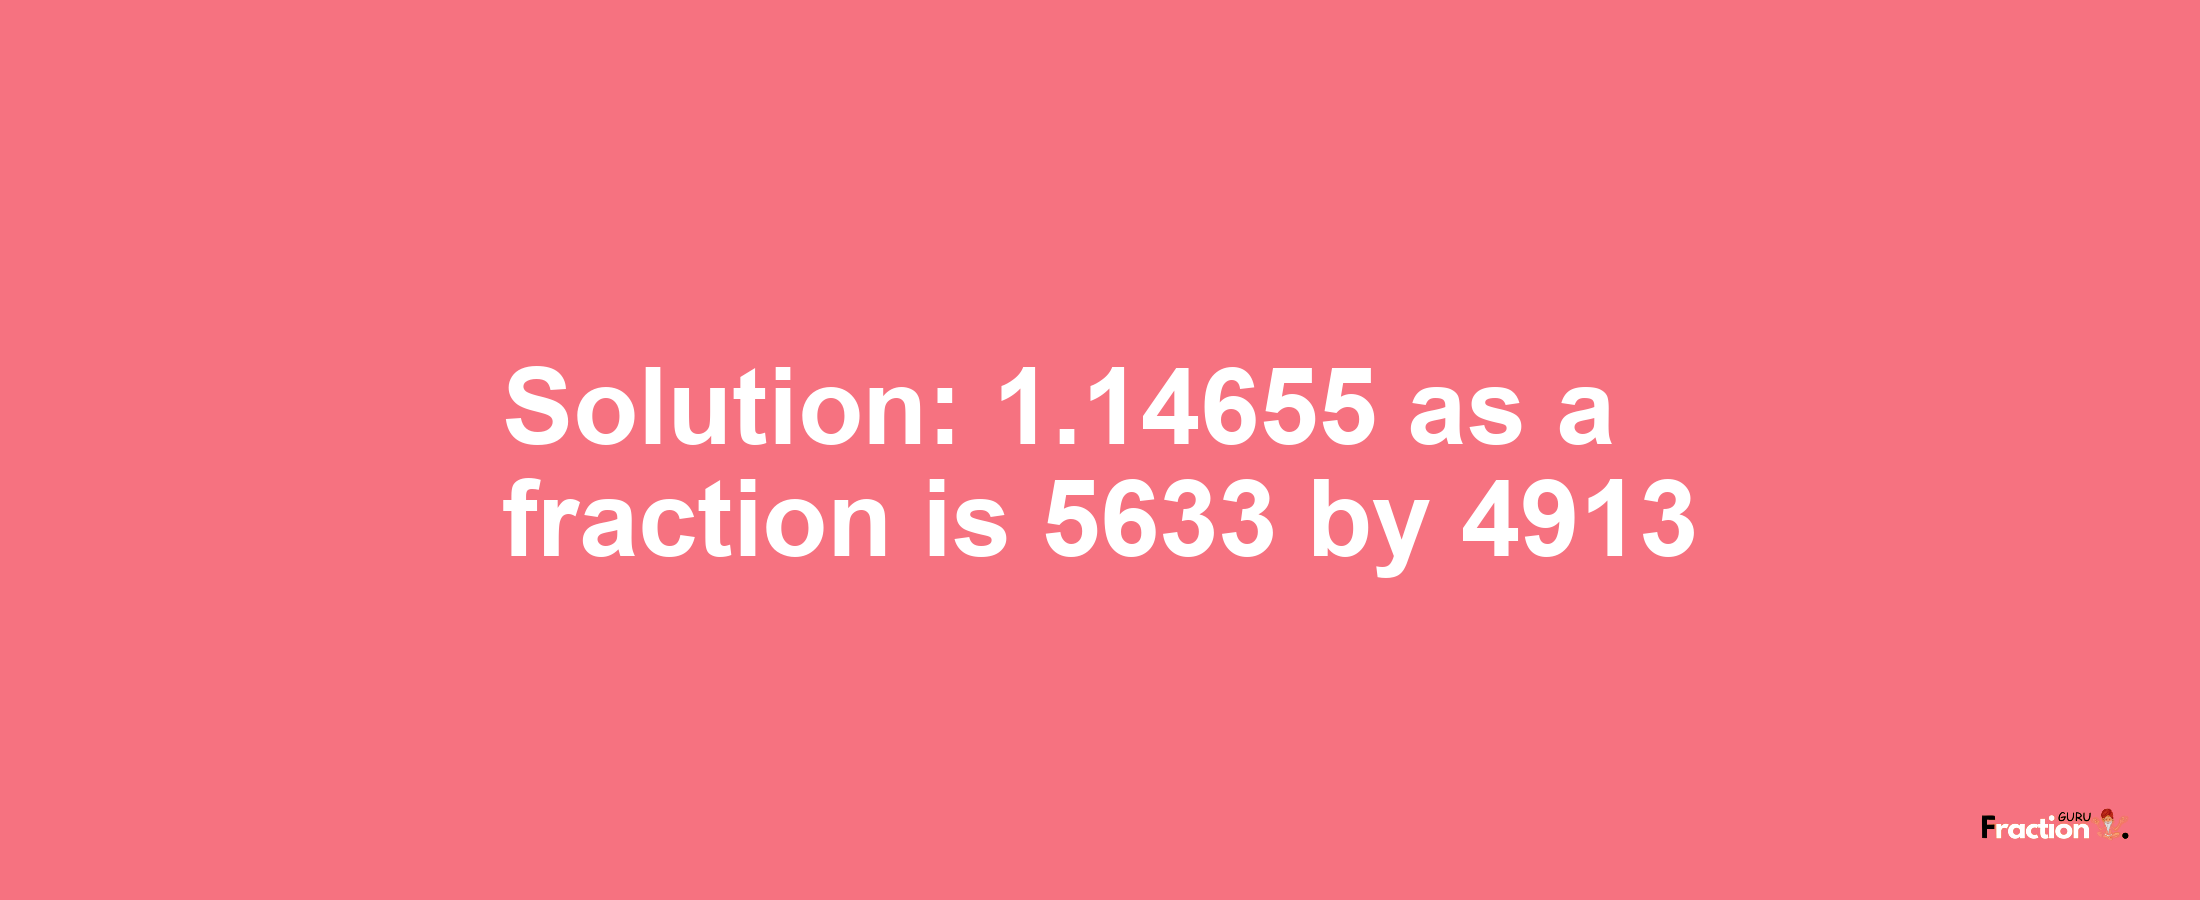 Solution:1.14655 as a fraction is 5633/4913